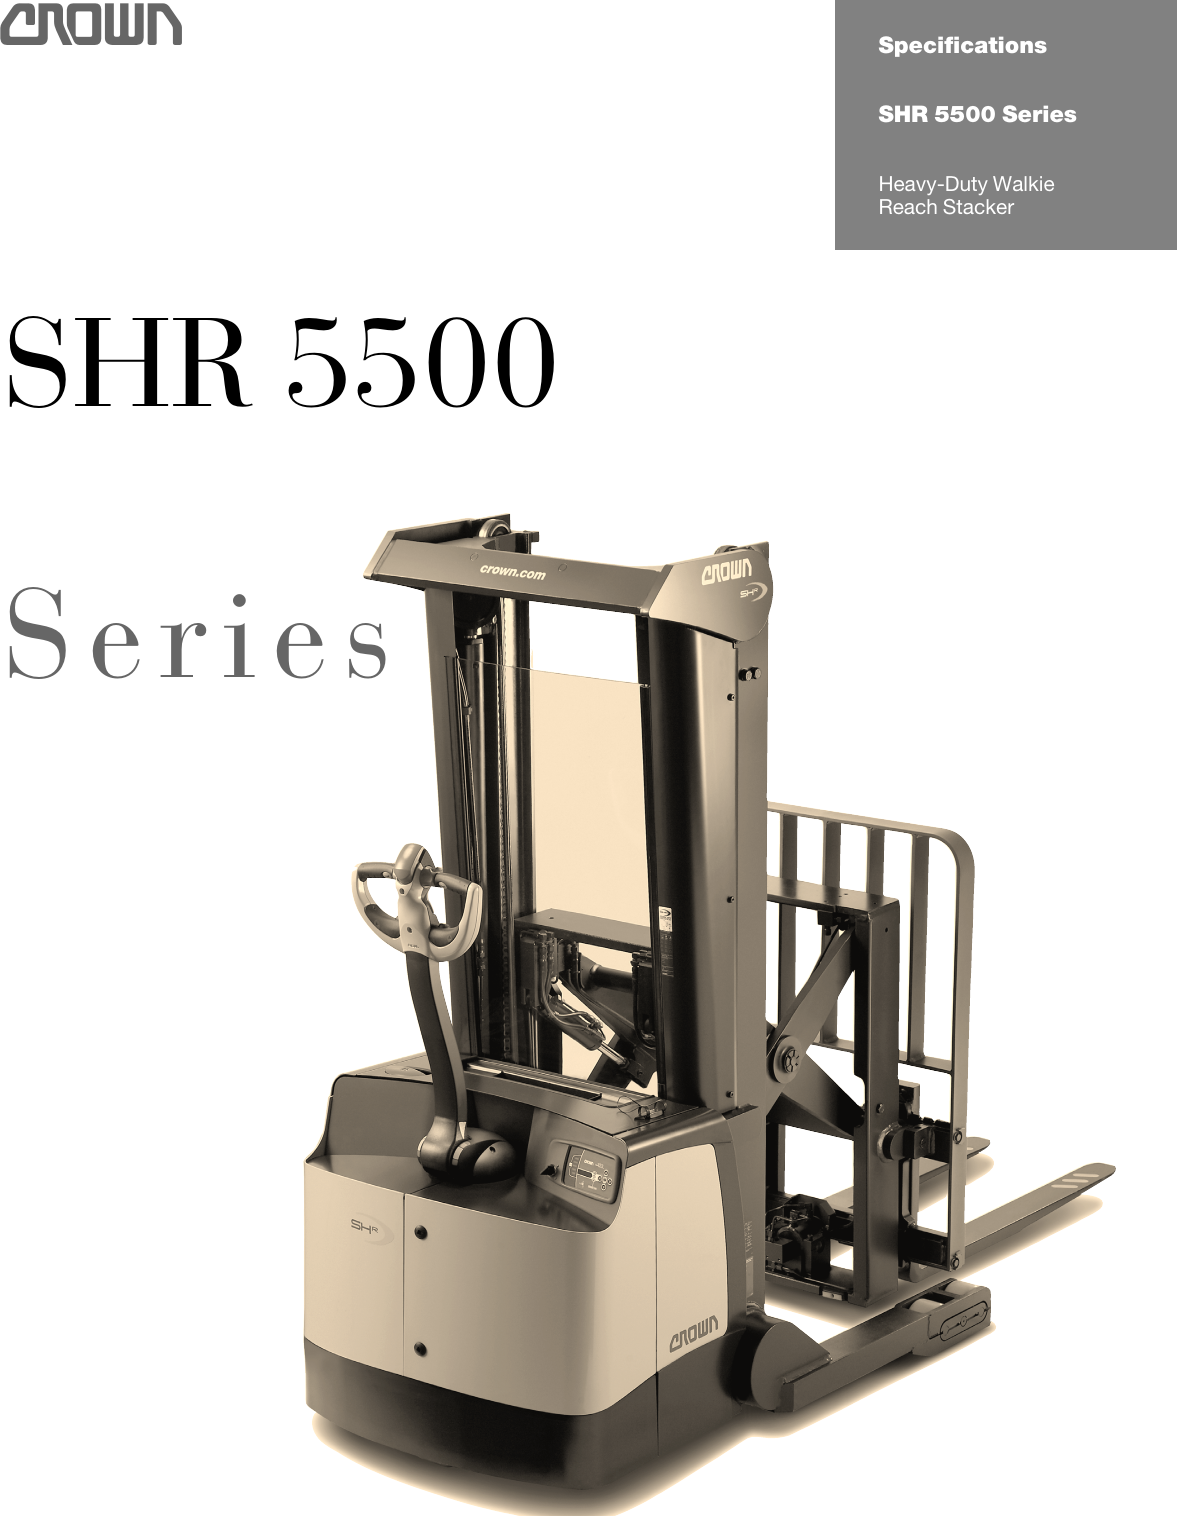 Page 1 of 6 - Crown-Equipment Crown-Equipment-Shr-5500-Series-Users-Manual- SF14906 1-08, -6 @ Normalize  Crown-equipment-shr-5500-series-users-manual